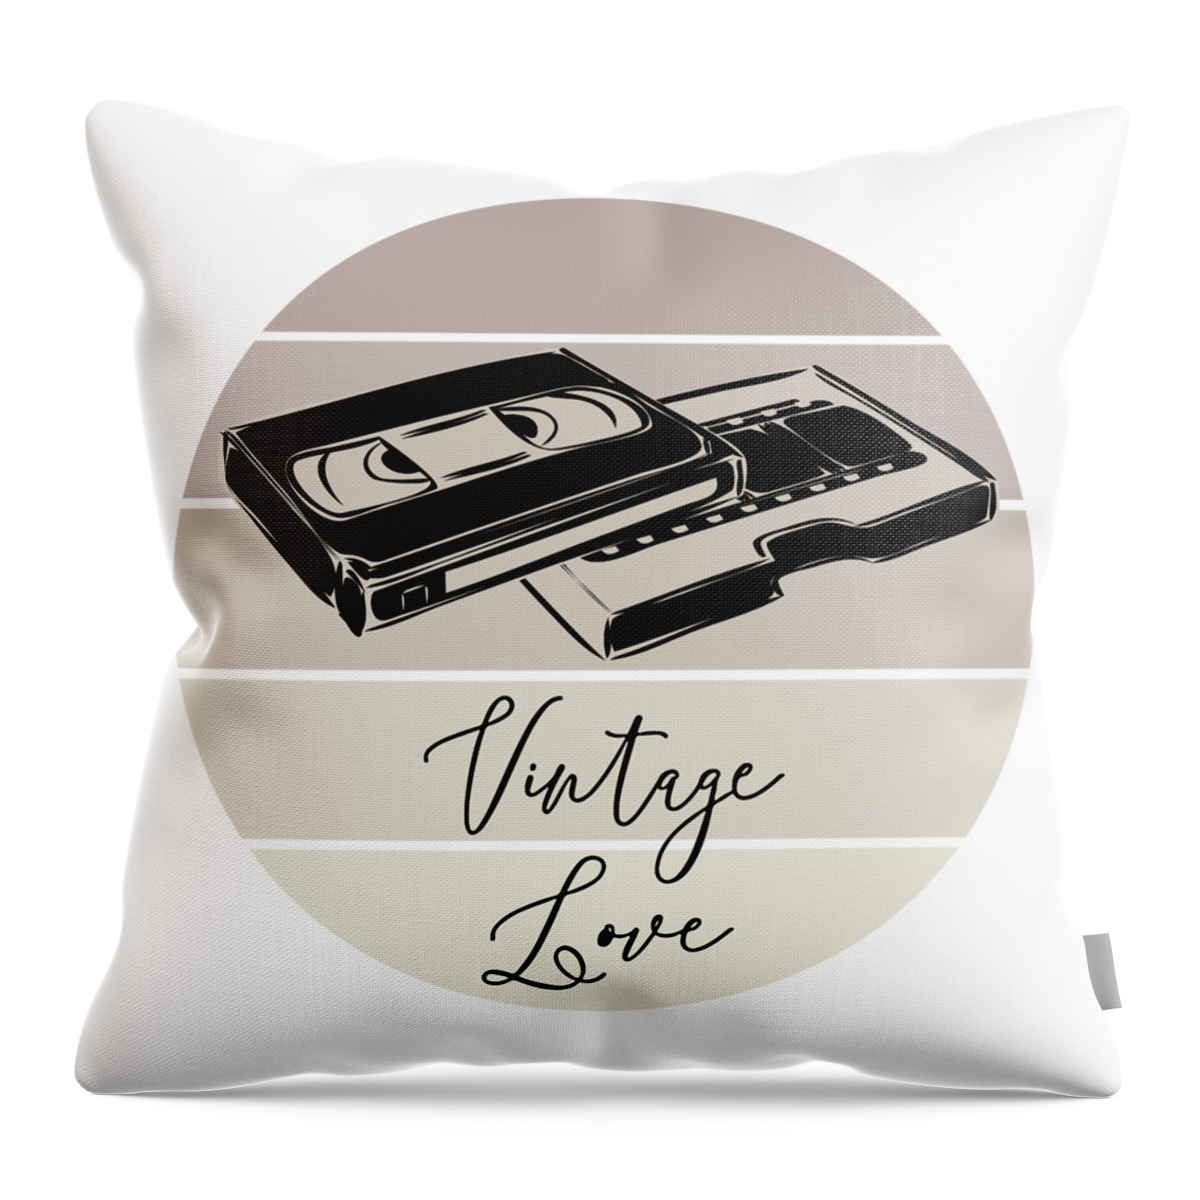 Cassette Tapes Throw Pillow featuring the digital art Vintage Love Collection, No 4/10 by Mounir Khalfouf